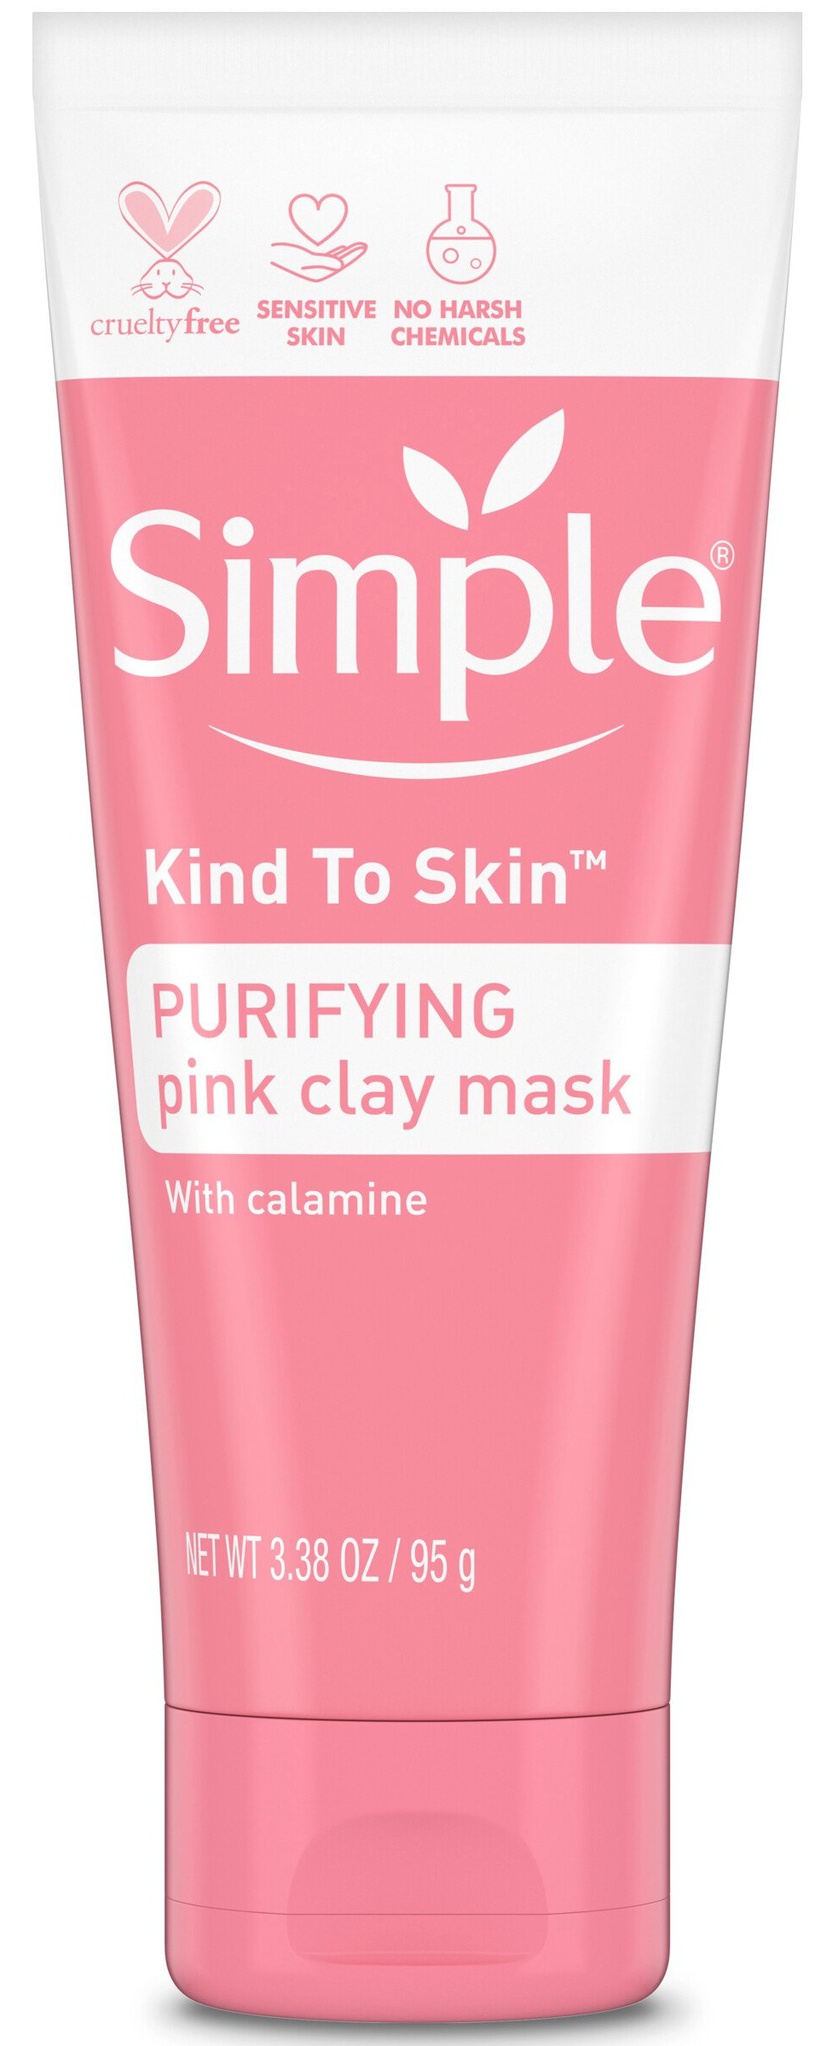 Simple Kind To Skin Purifying Pink Clay Mask